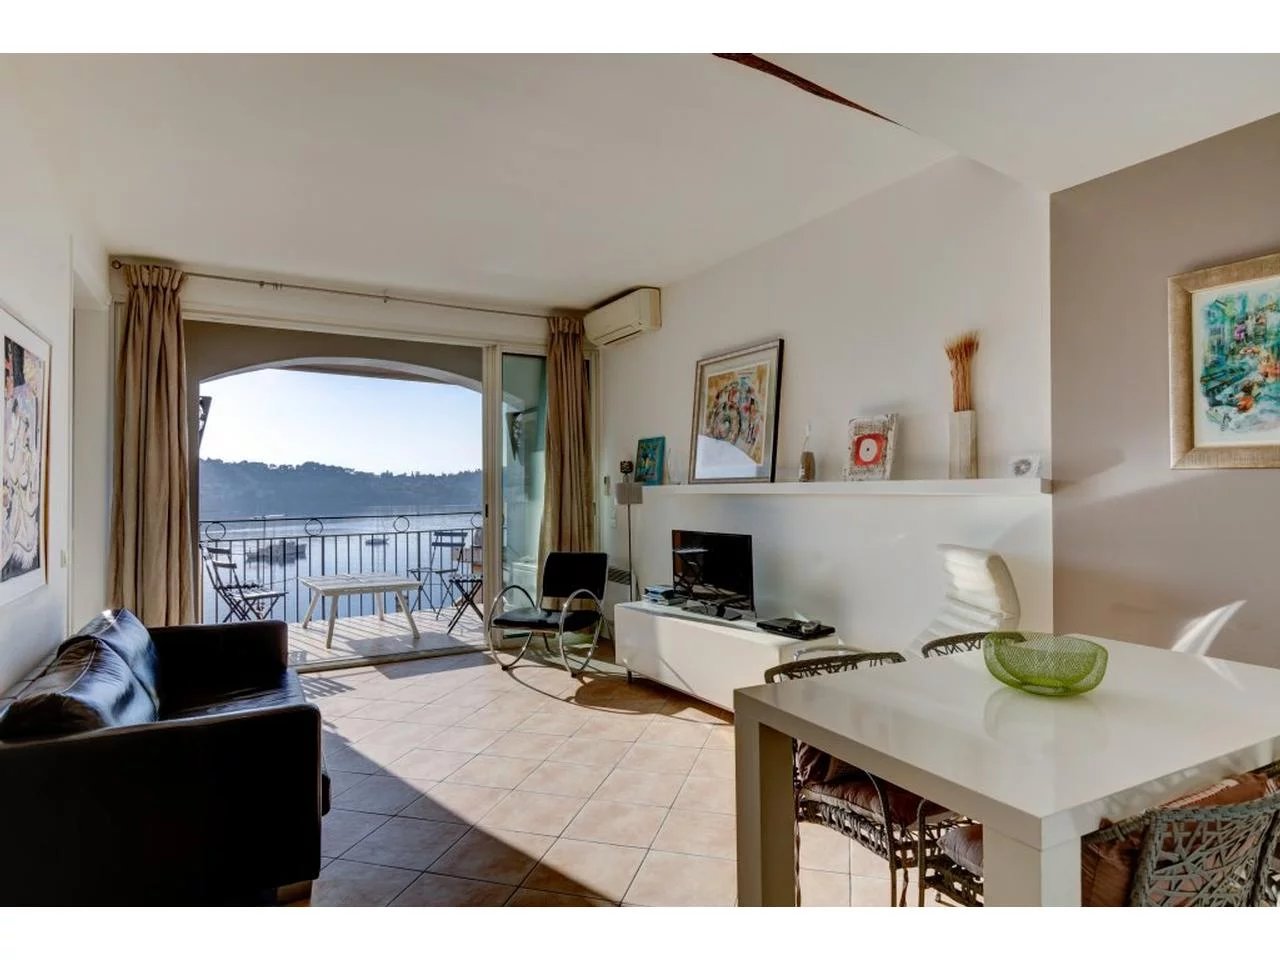 Charming apartment with panoramic views of the bay of Villefranche-sur-mer.